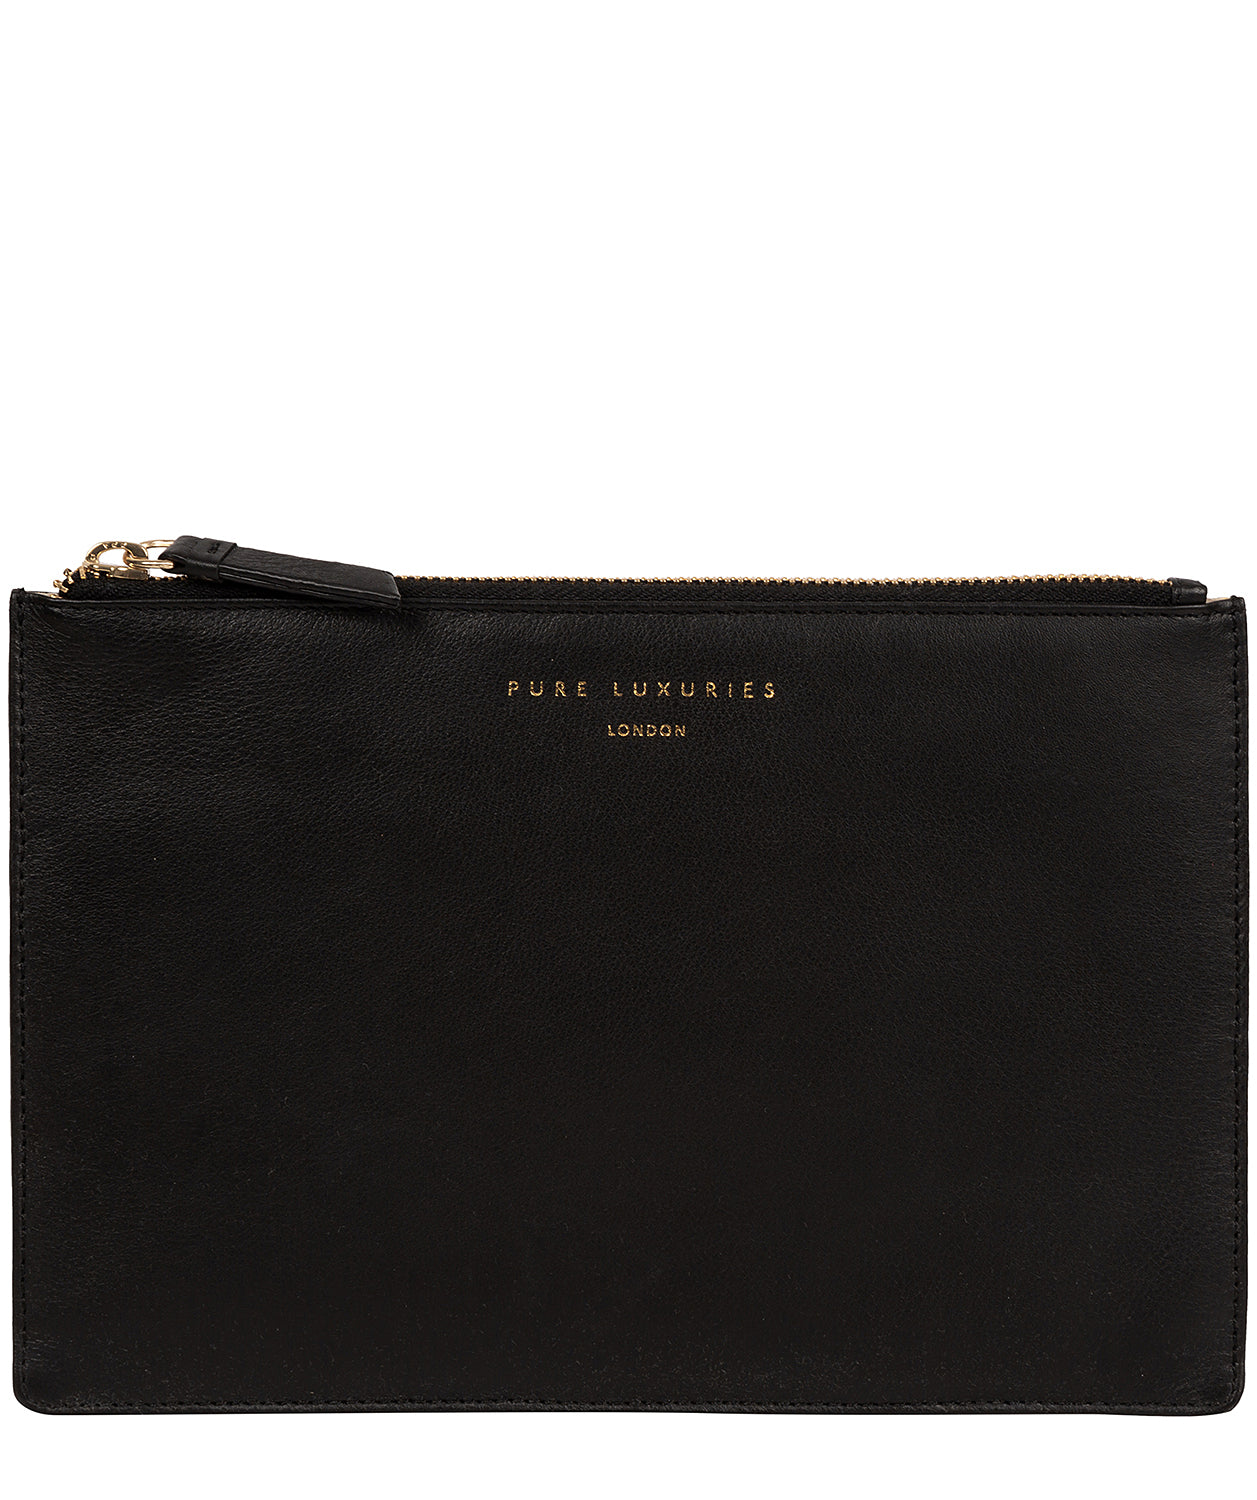 Black Leather Make-up Bag 'Osterly' by Pure Luxuries – Pure Luxuries London